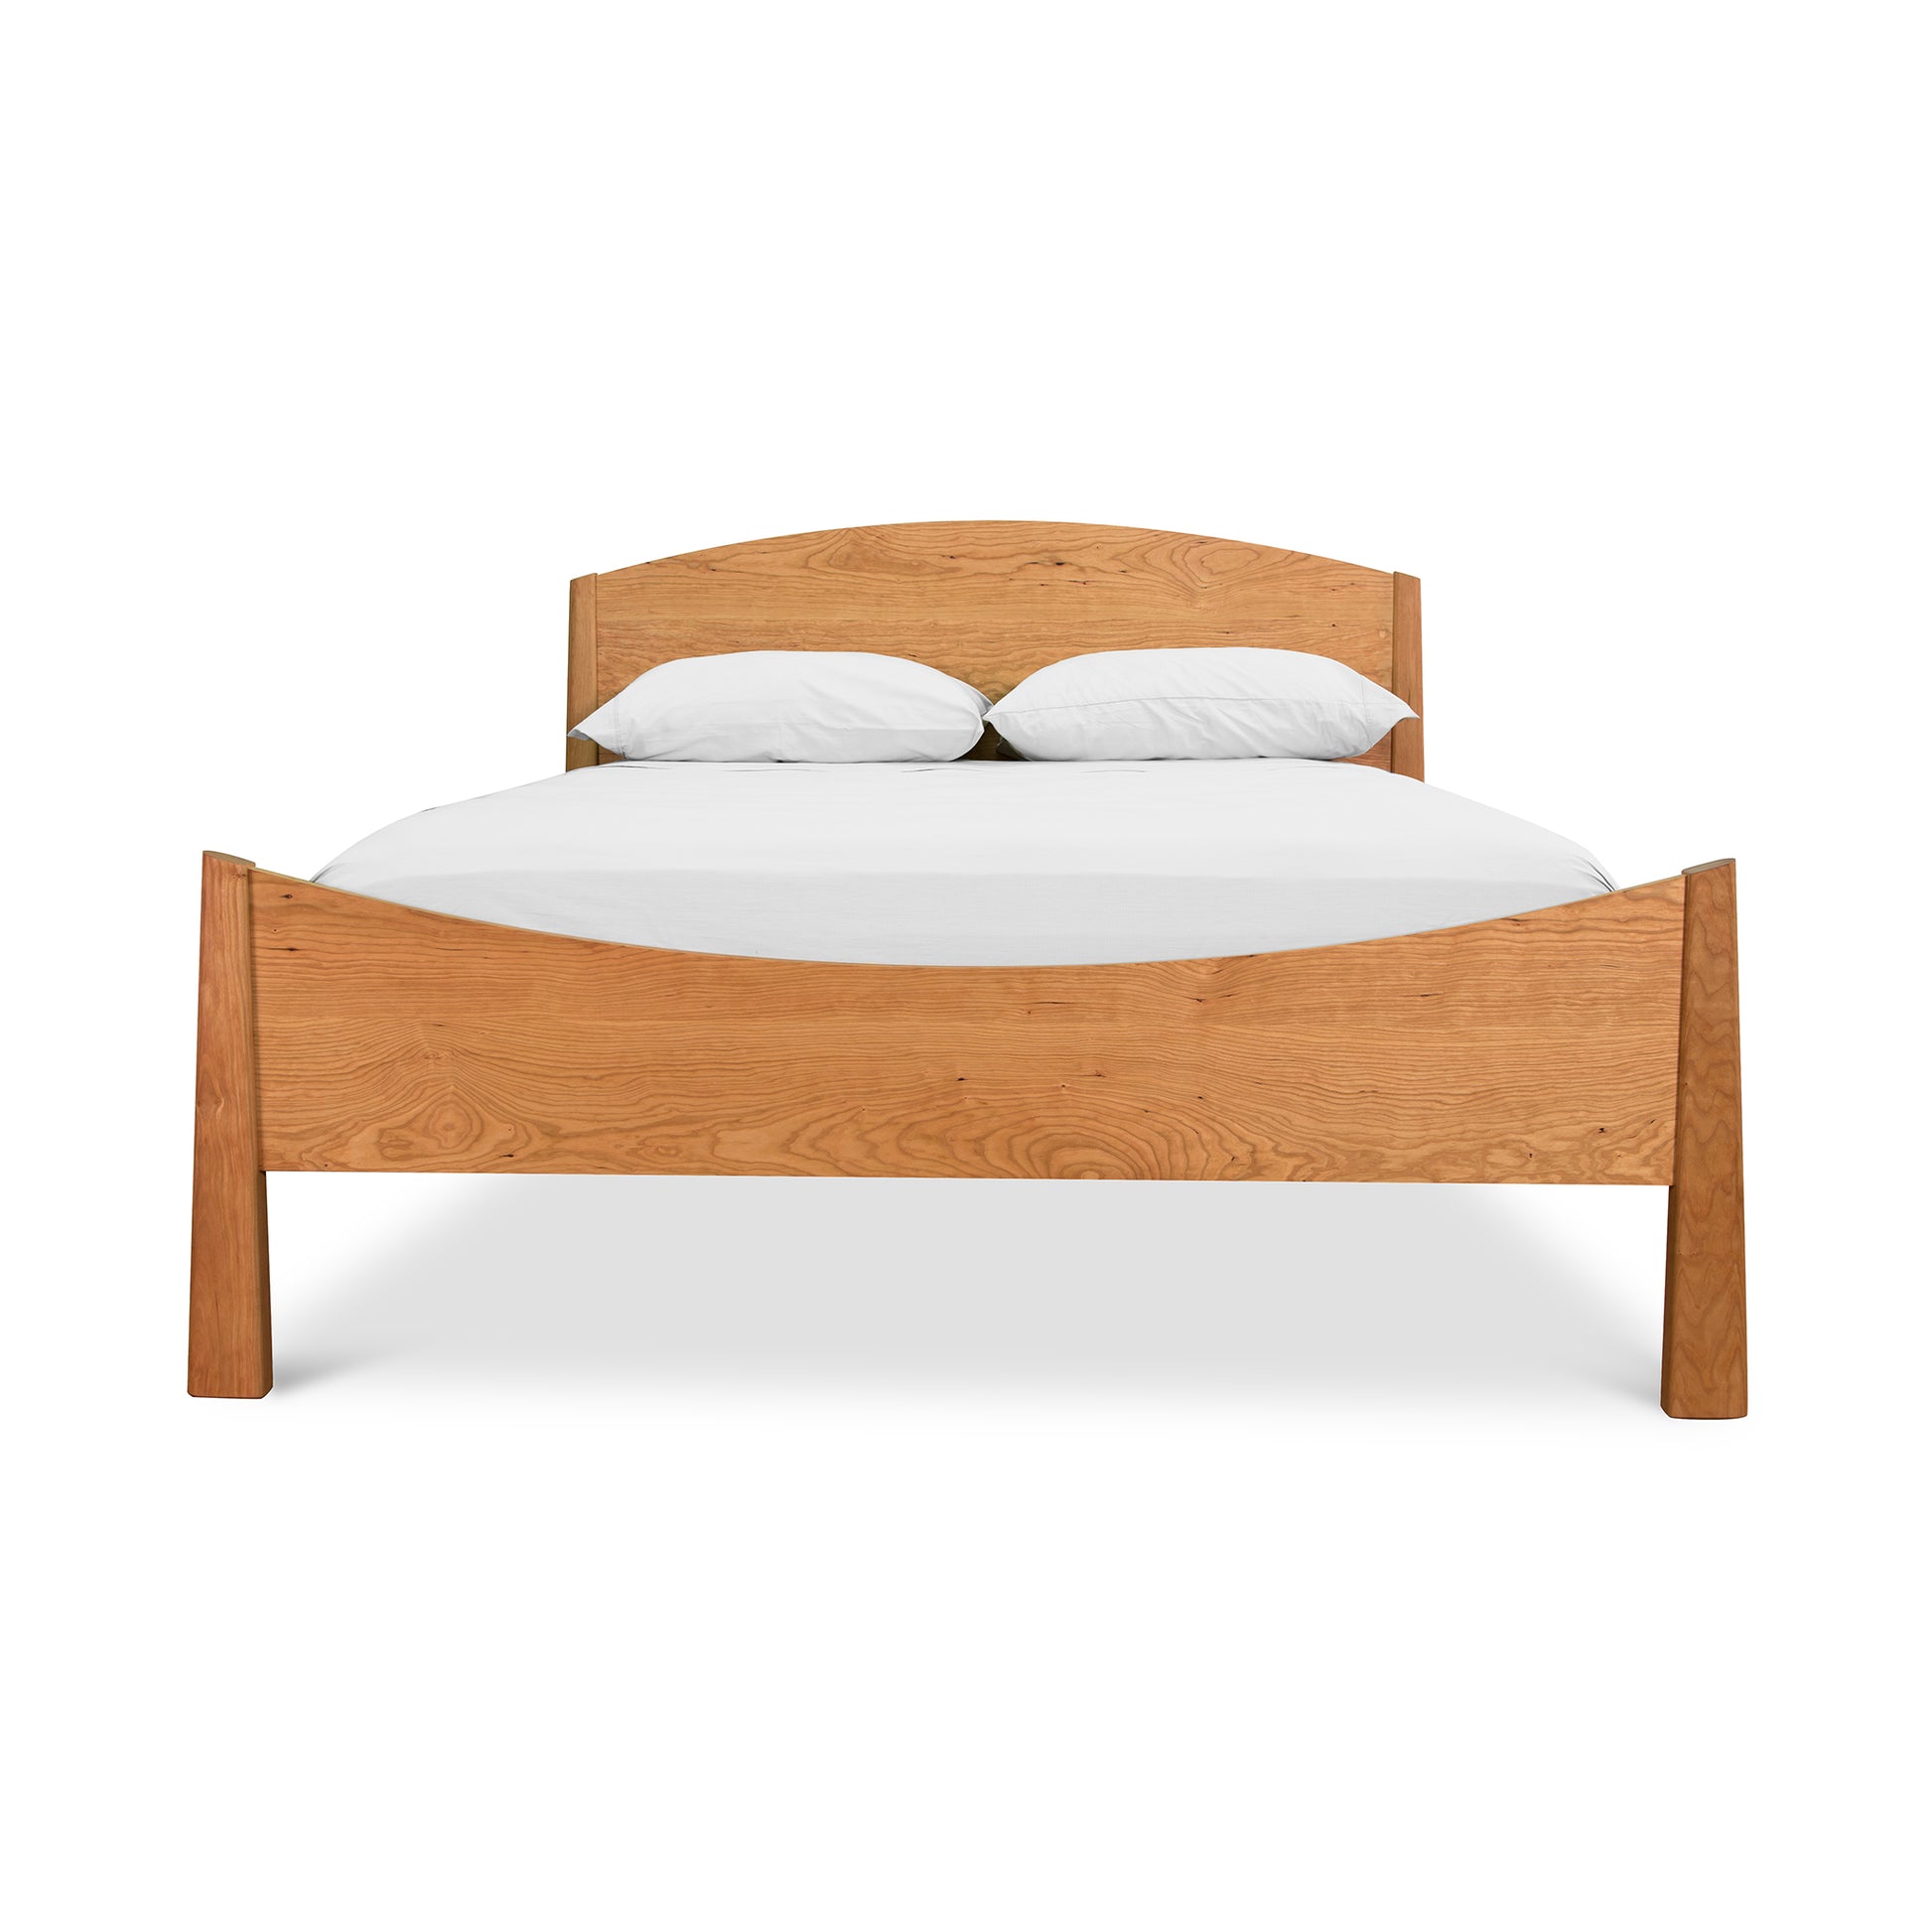 A Maple Corner Woodworks Cherry Moon Bed frame with a headboard, fitted with white bedding and two pillows, isolated on a white background.